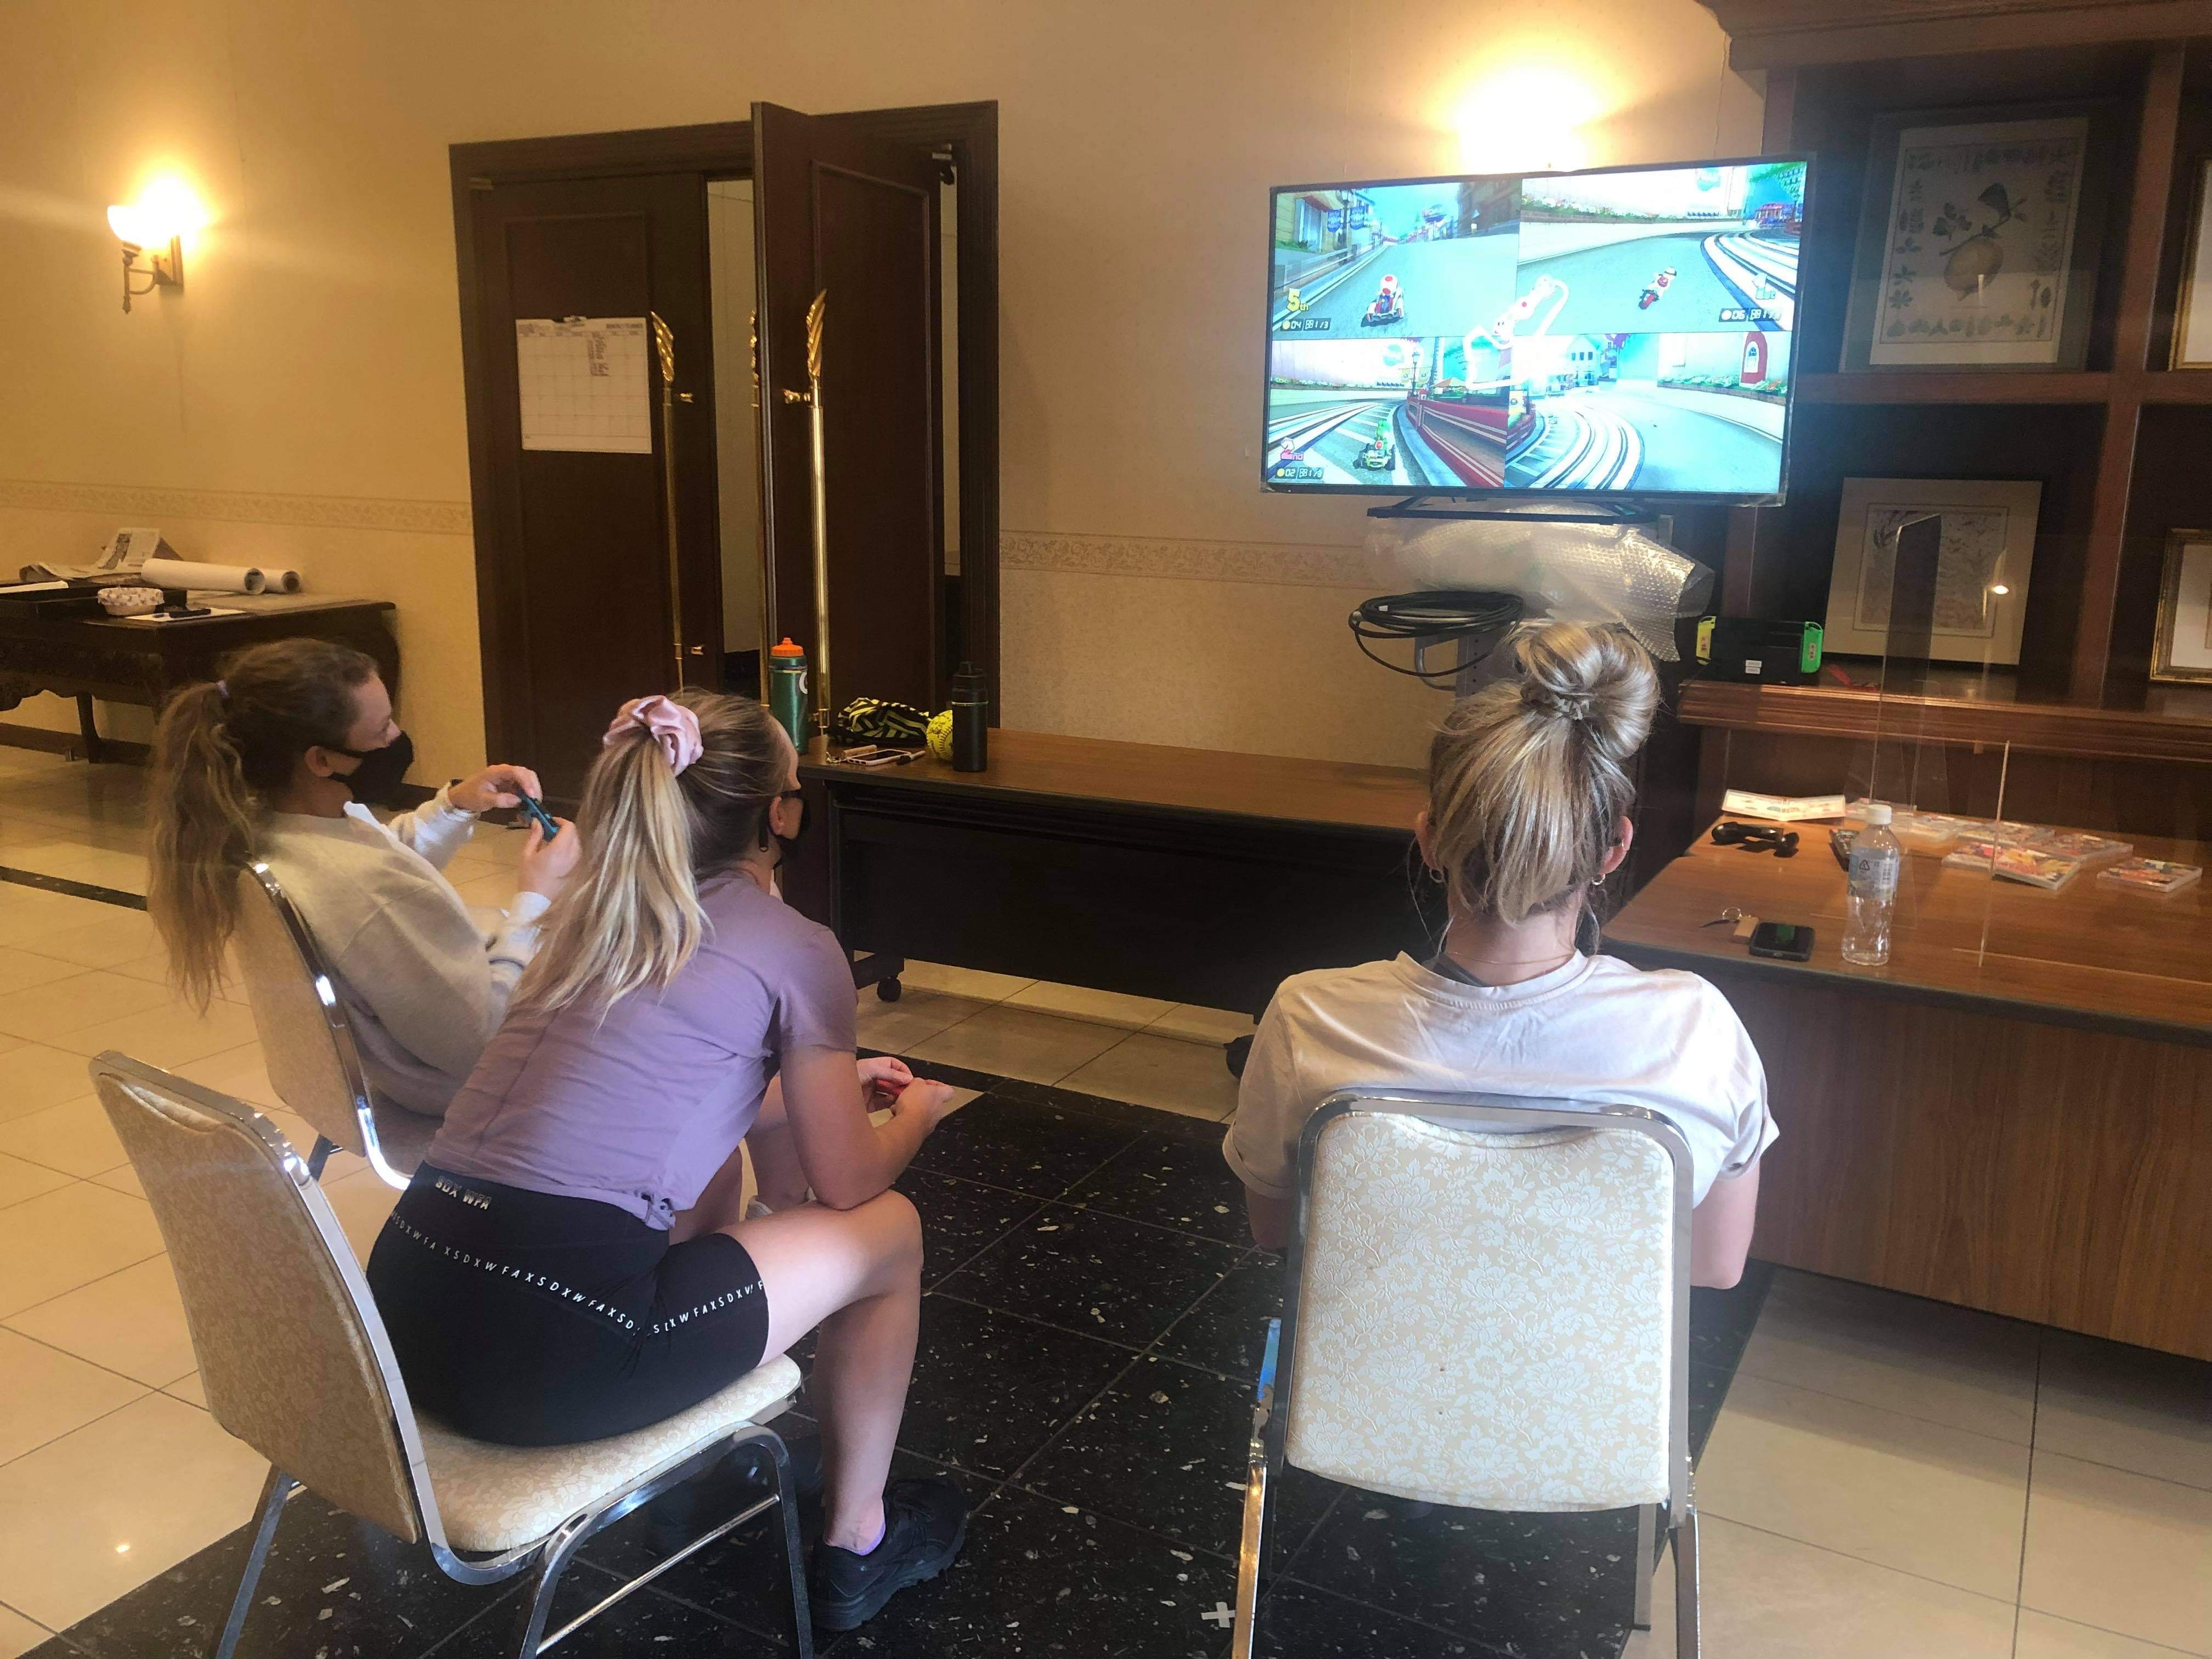 Australian softball players passing time by playing Nintendo Switch in their hotel in Ota, Japan. (Photo courtesy of Softball Australia)